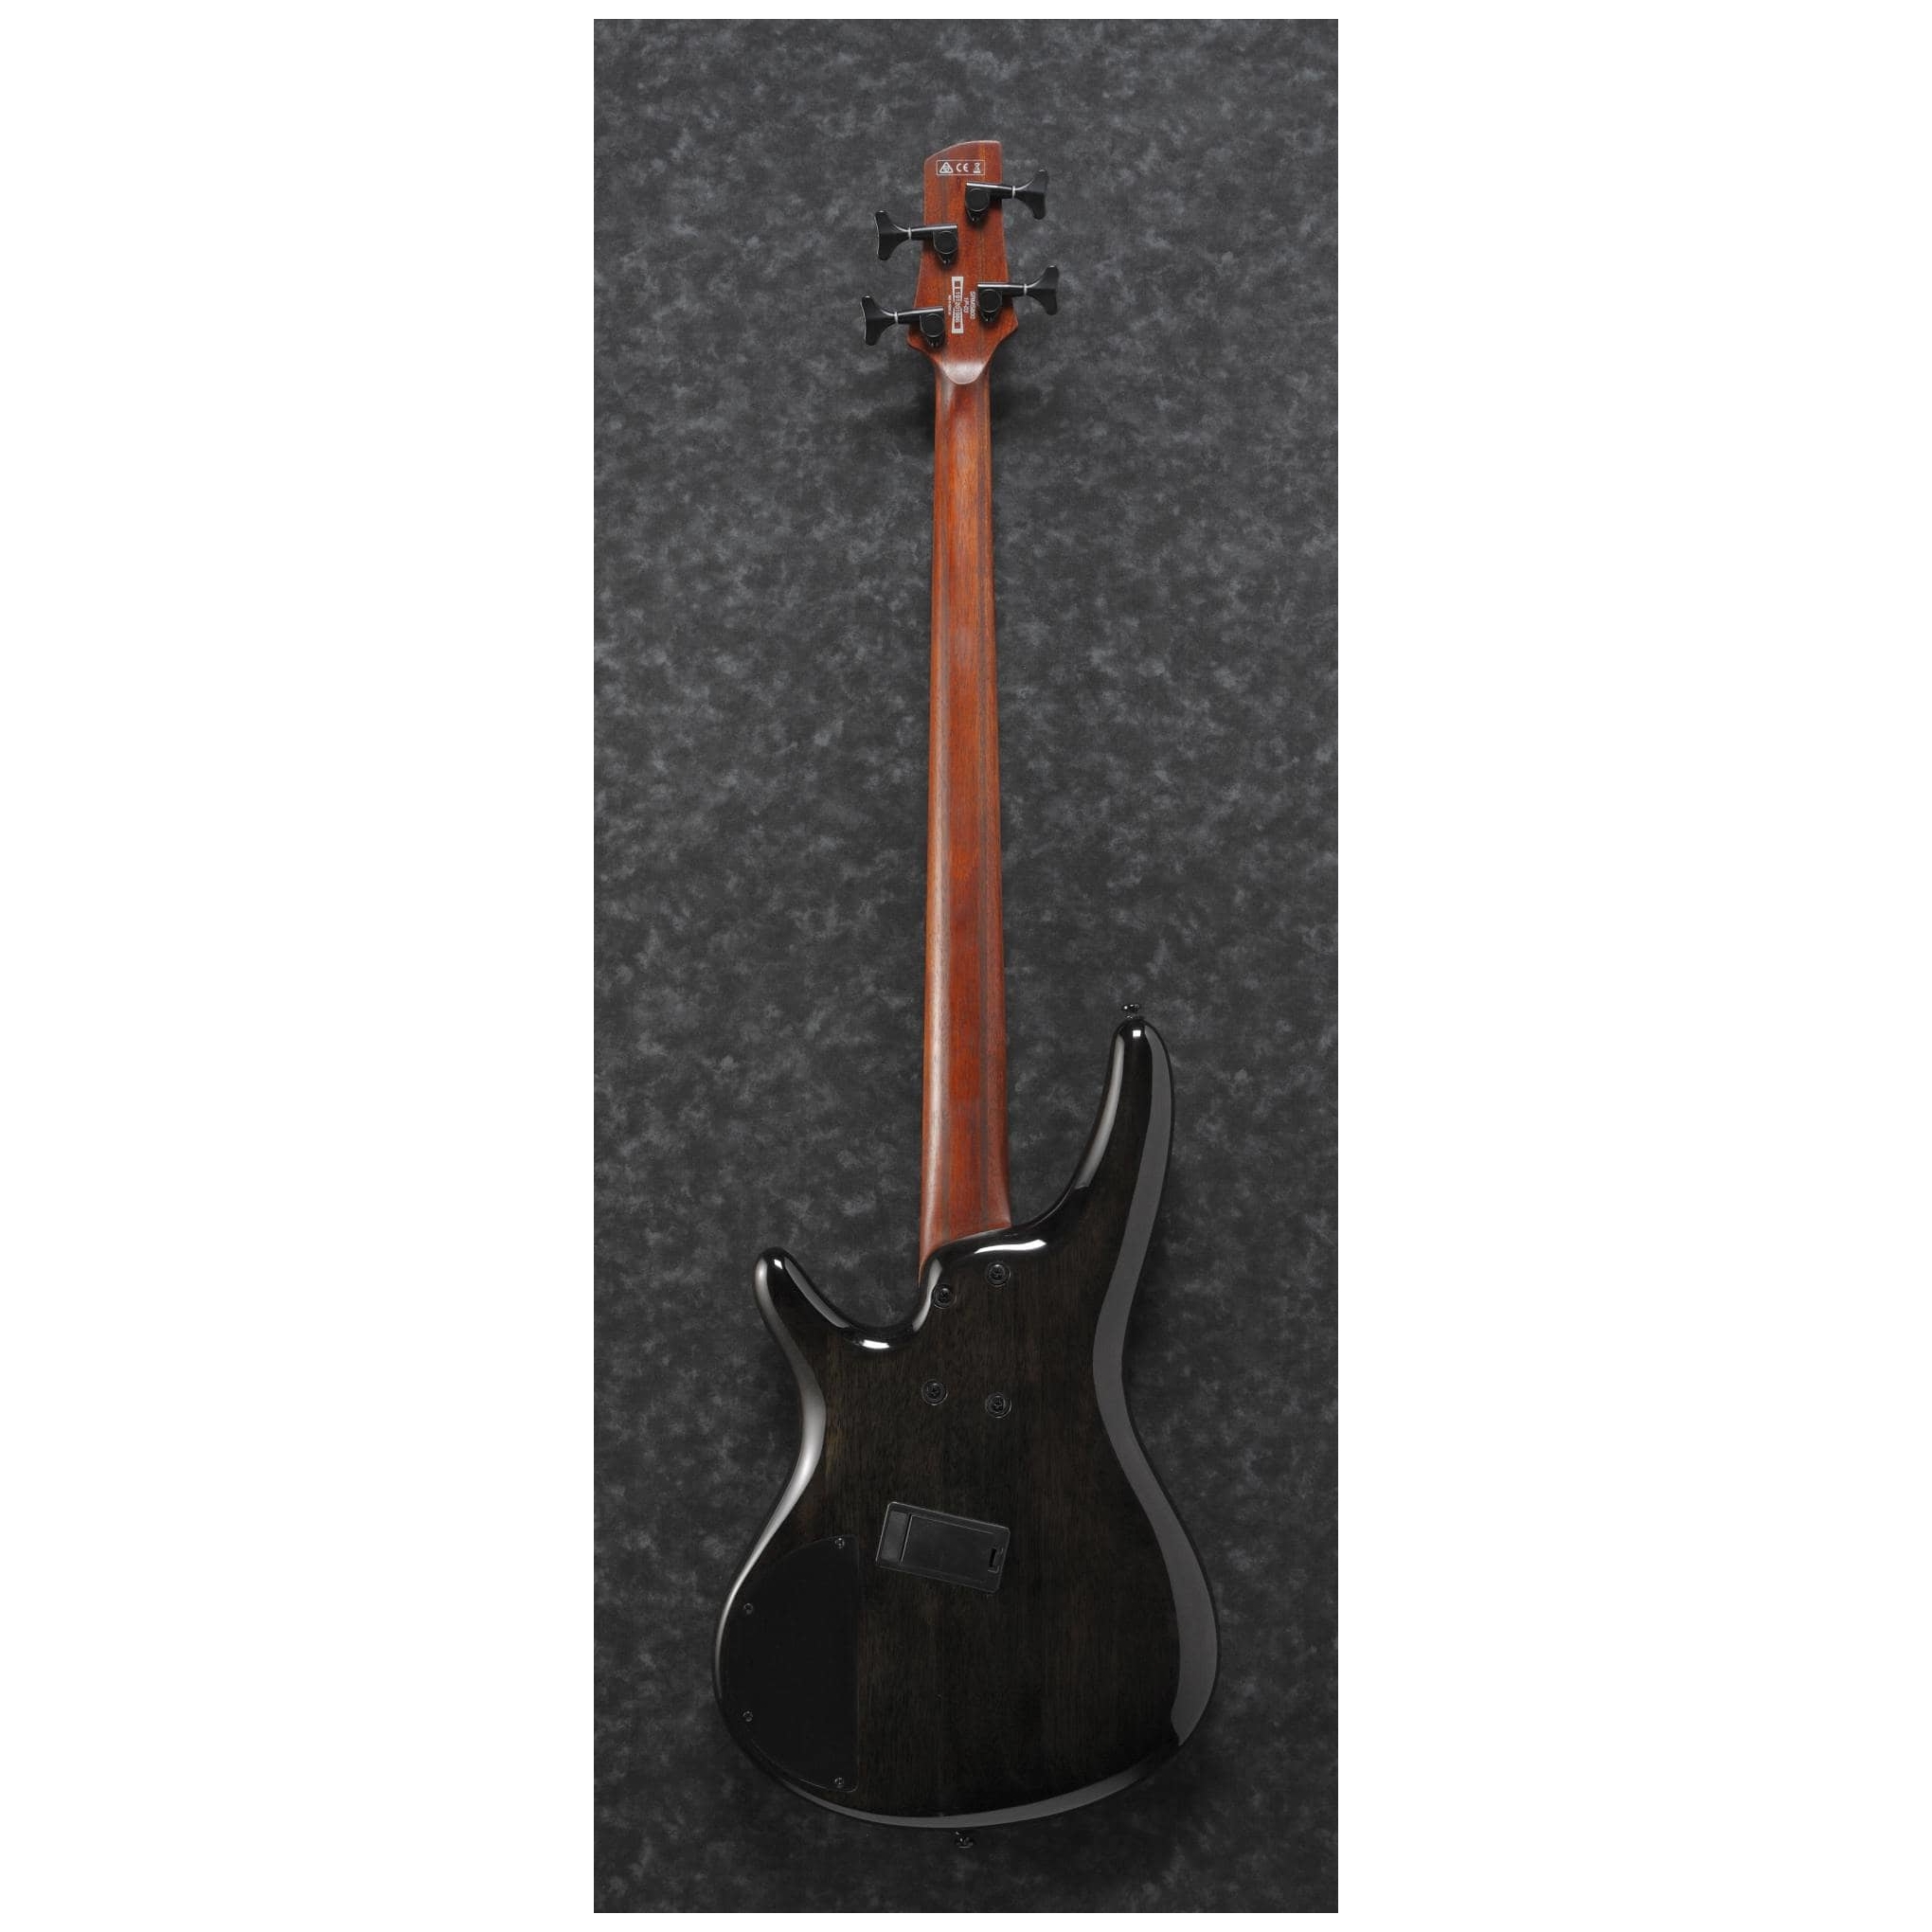 Ibanez SRMS800-DTW B-Ware